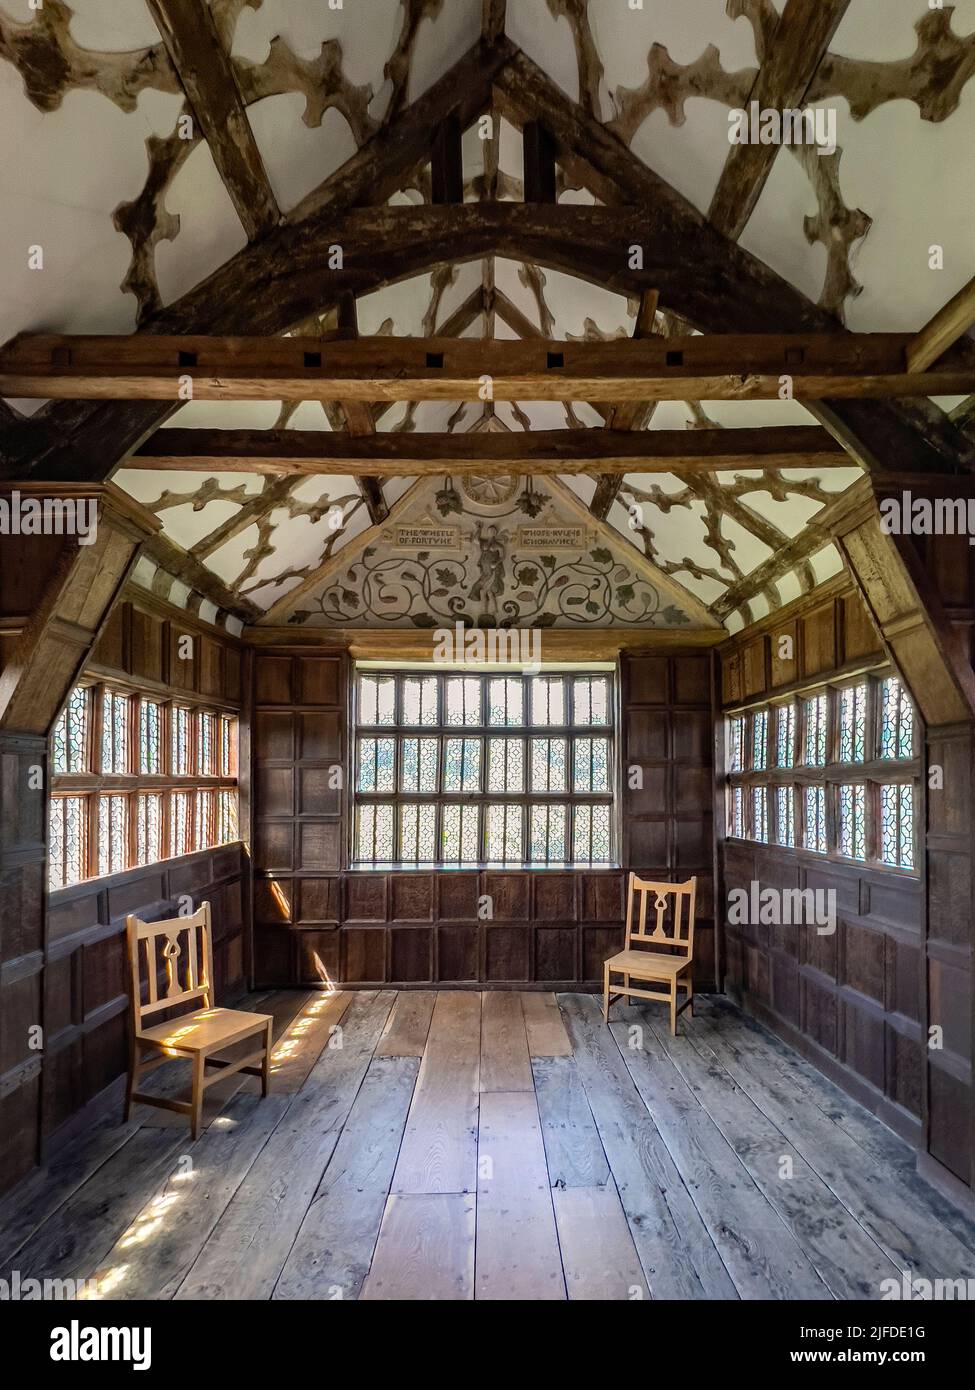 The Long Hall in Little Moreton Hall, a 16th-century half-timbered Manor House near Congleton in Cheshire, northwest England. Stock Photo